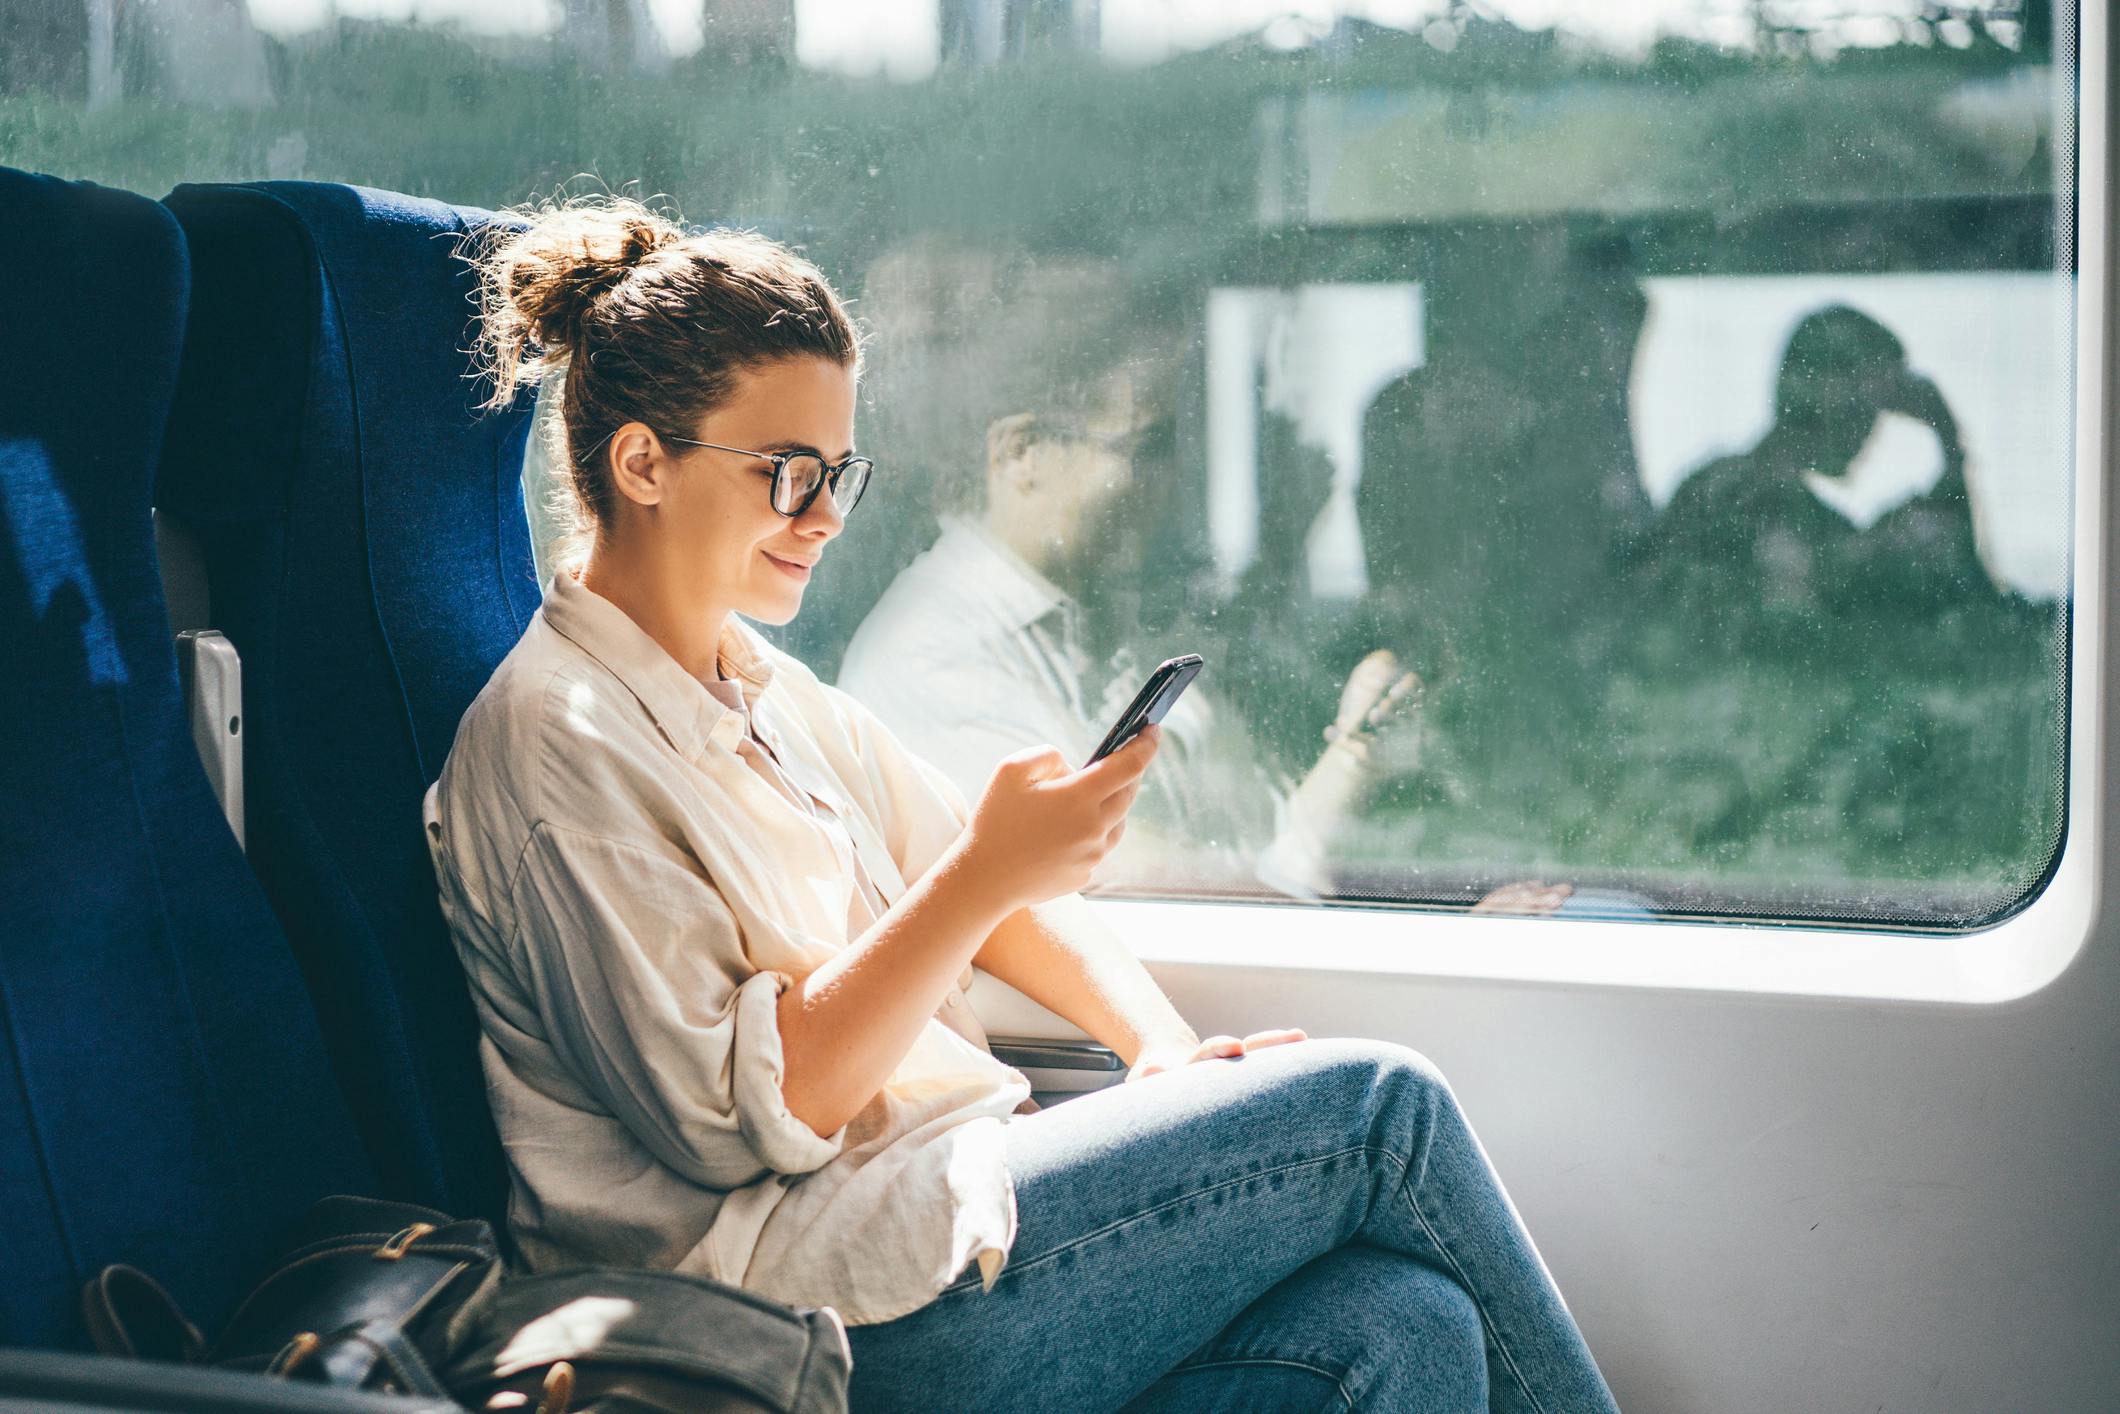 A woman on the train wears glasses as she reads from her phone.